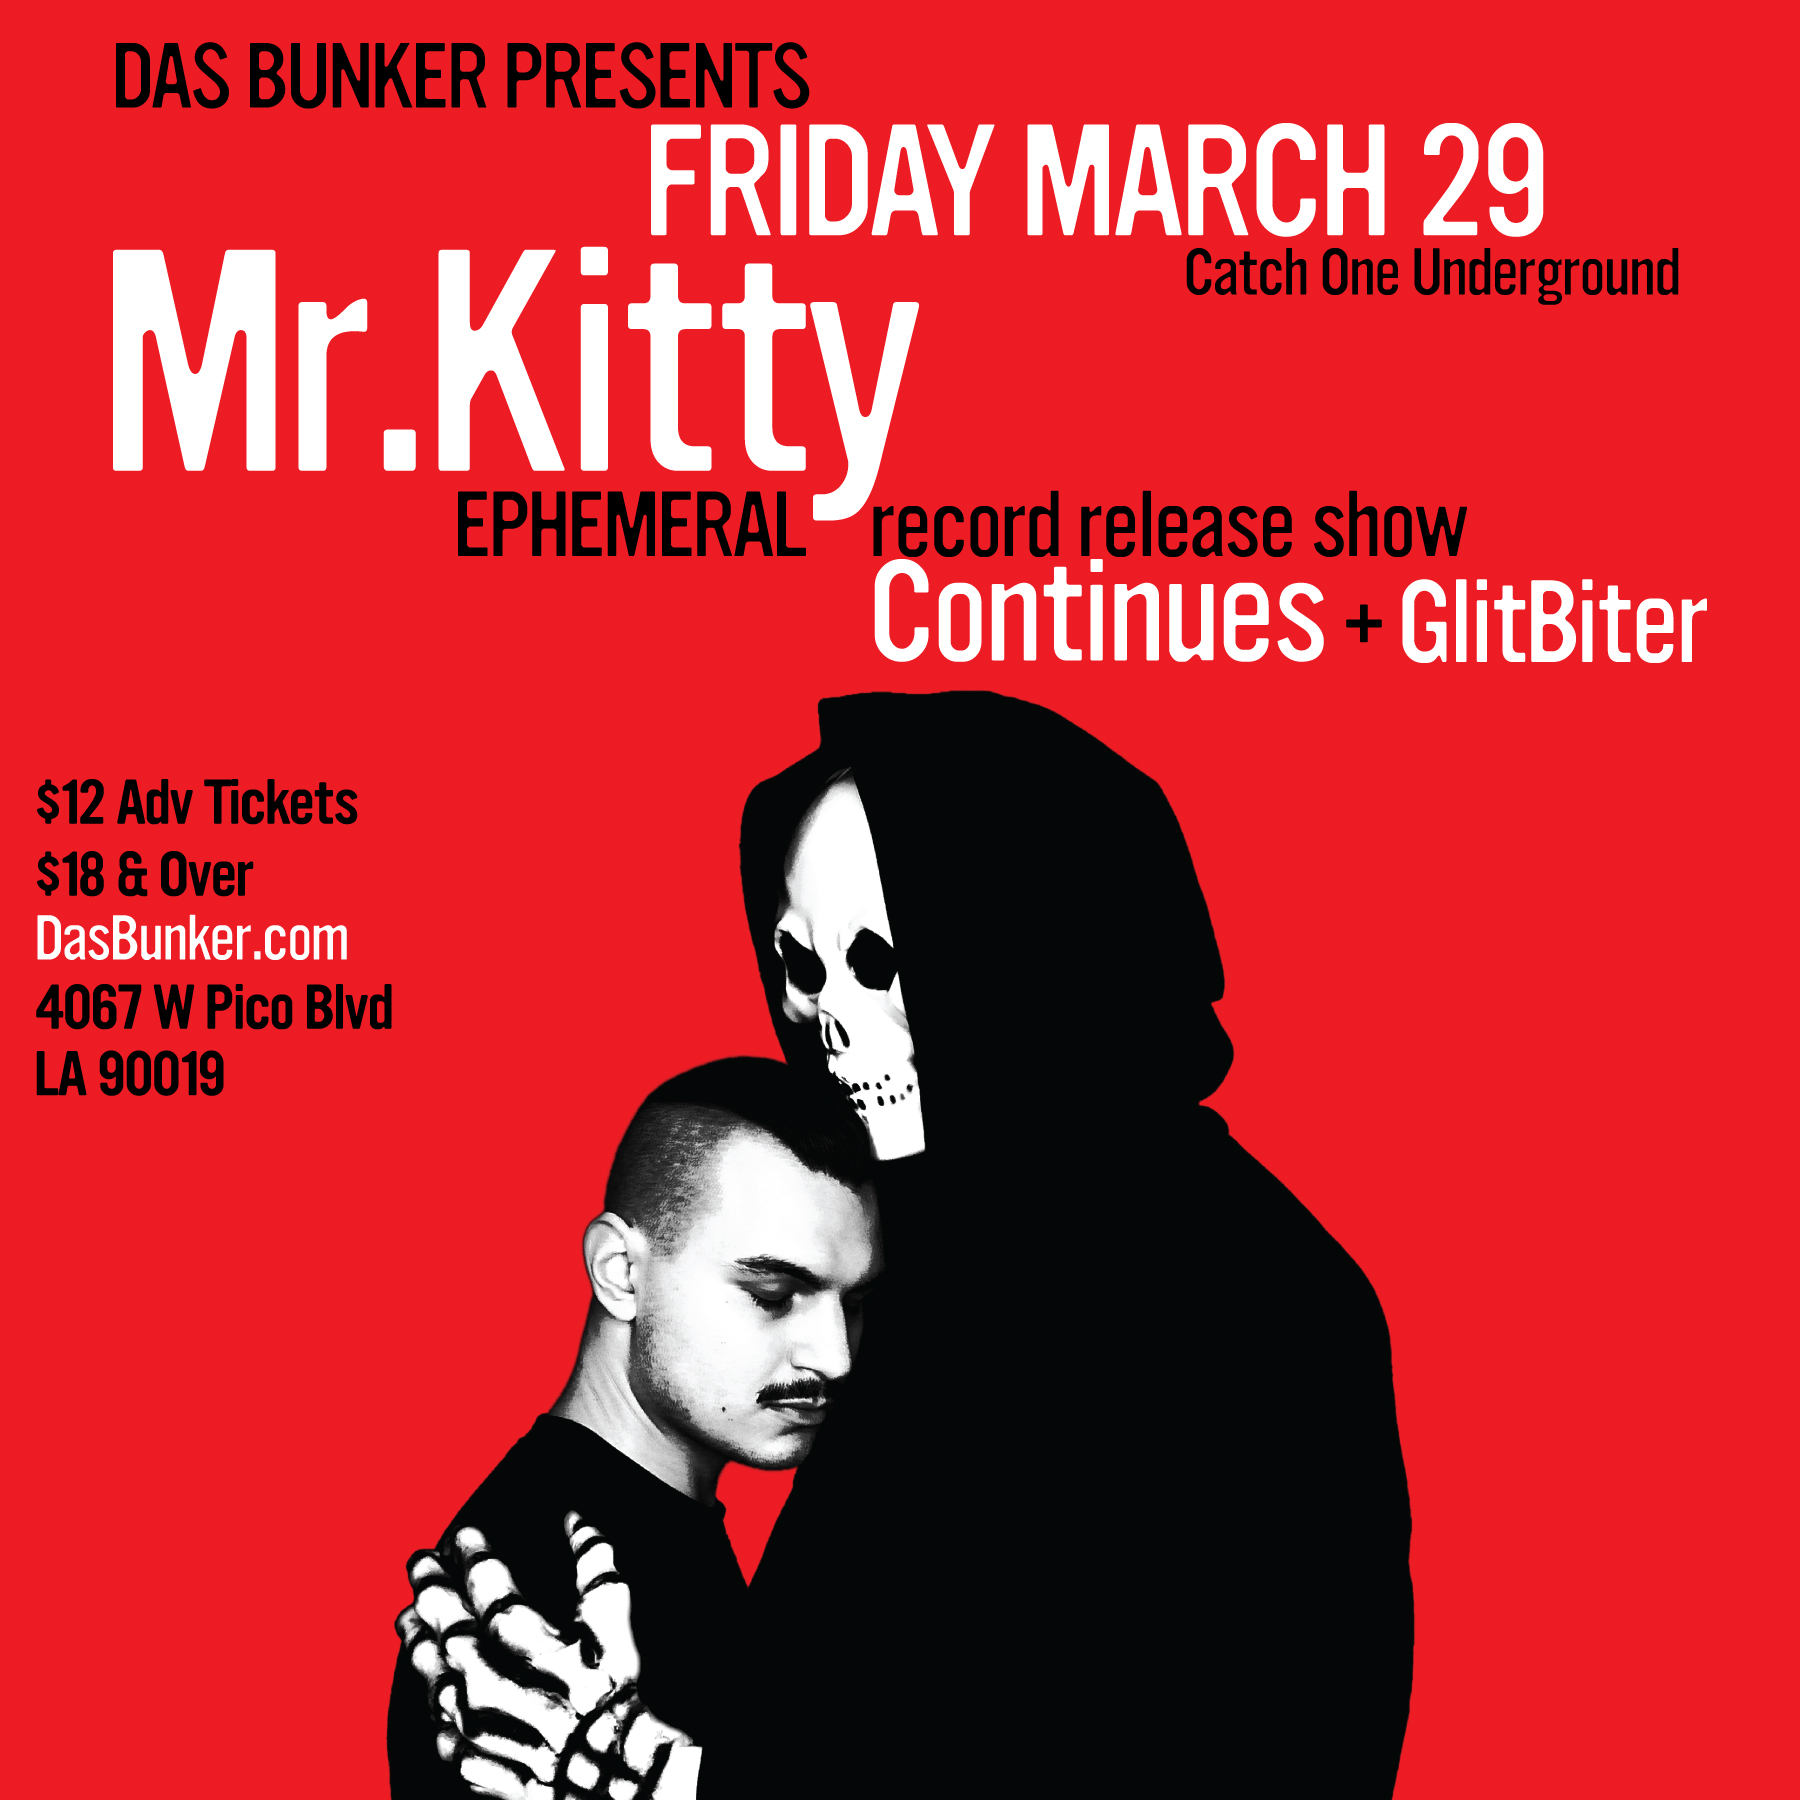 Buy Tickets to Mr.Kitty in Los Angeles on Mar 29, 2019